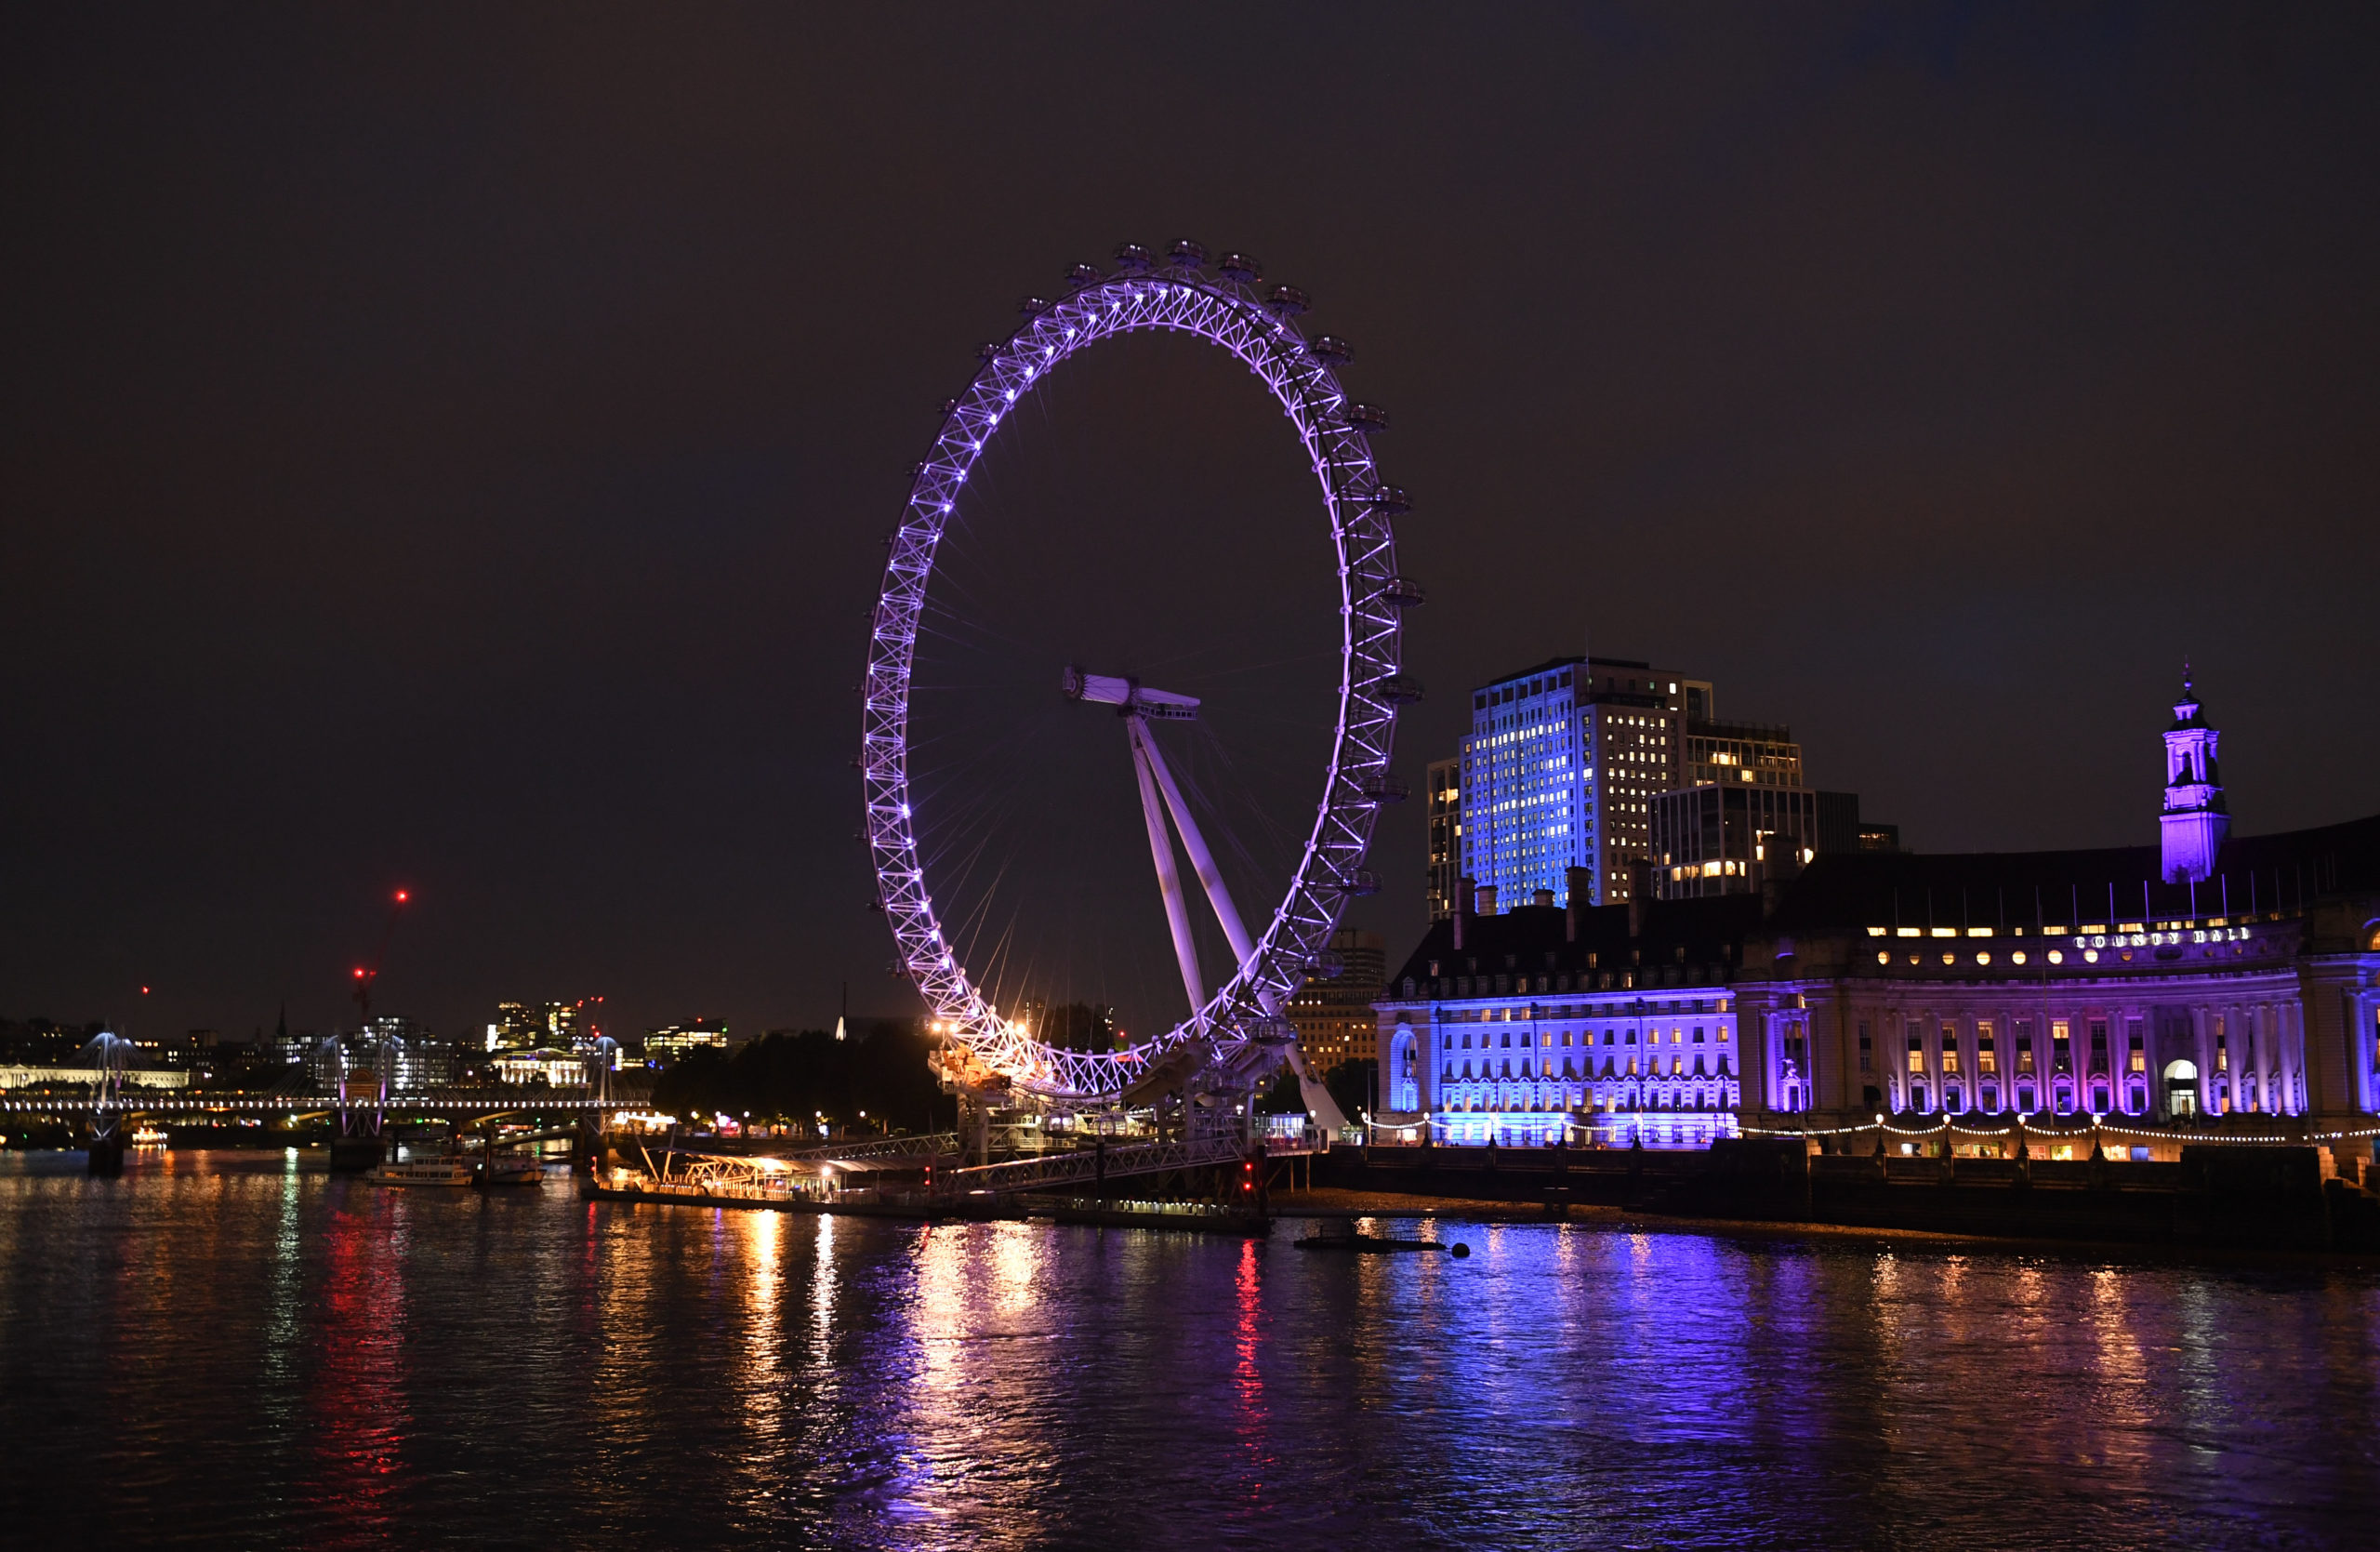 Photograph of the lastminute.com London Eye, illuminated in purple at night.